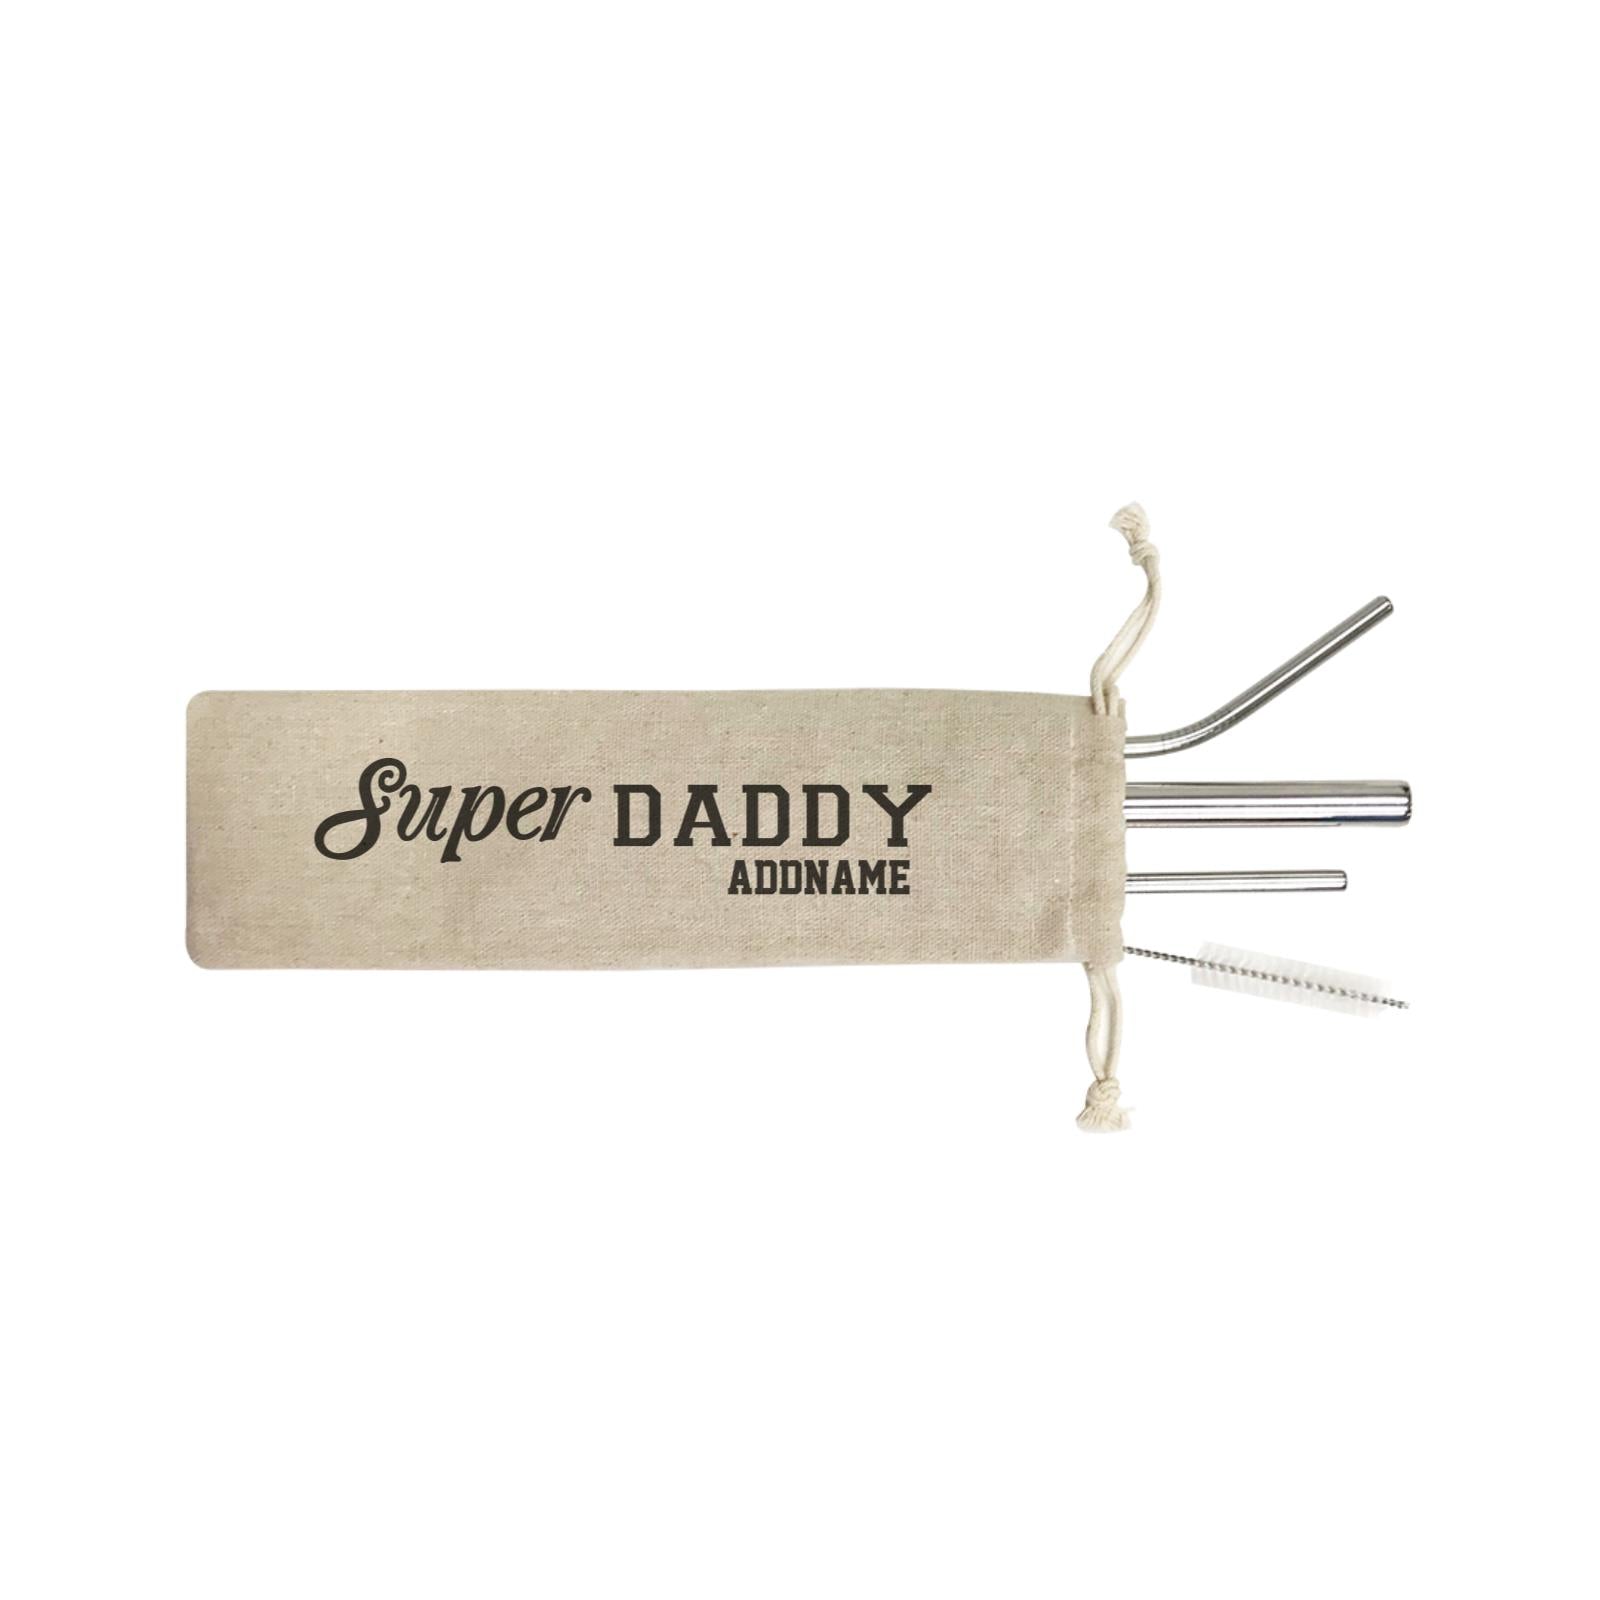 Super Definition Family Super Daddy Addname SB 4-In-1 Stainless Steel Straw Set in Satchel